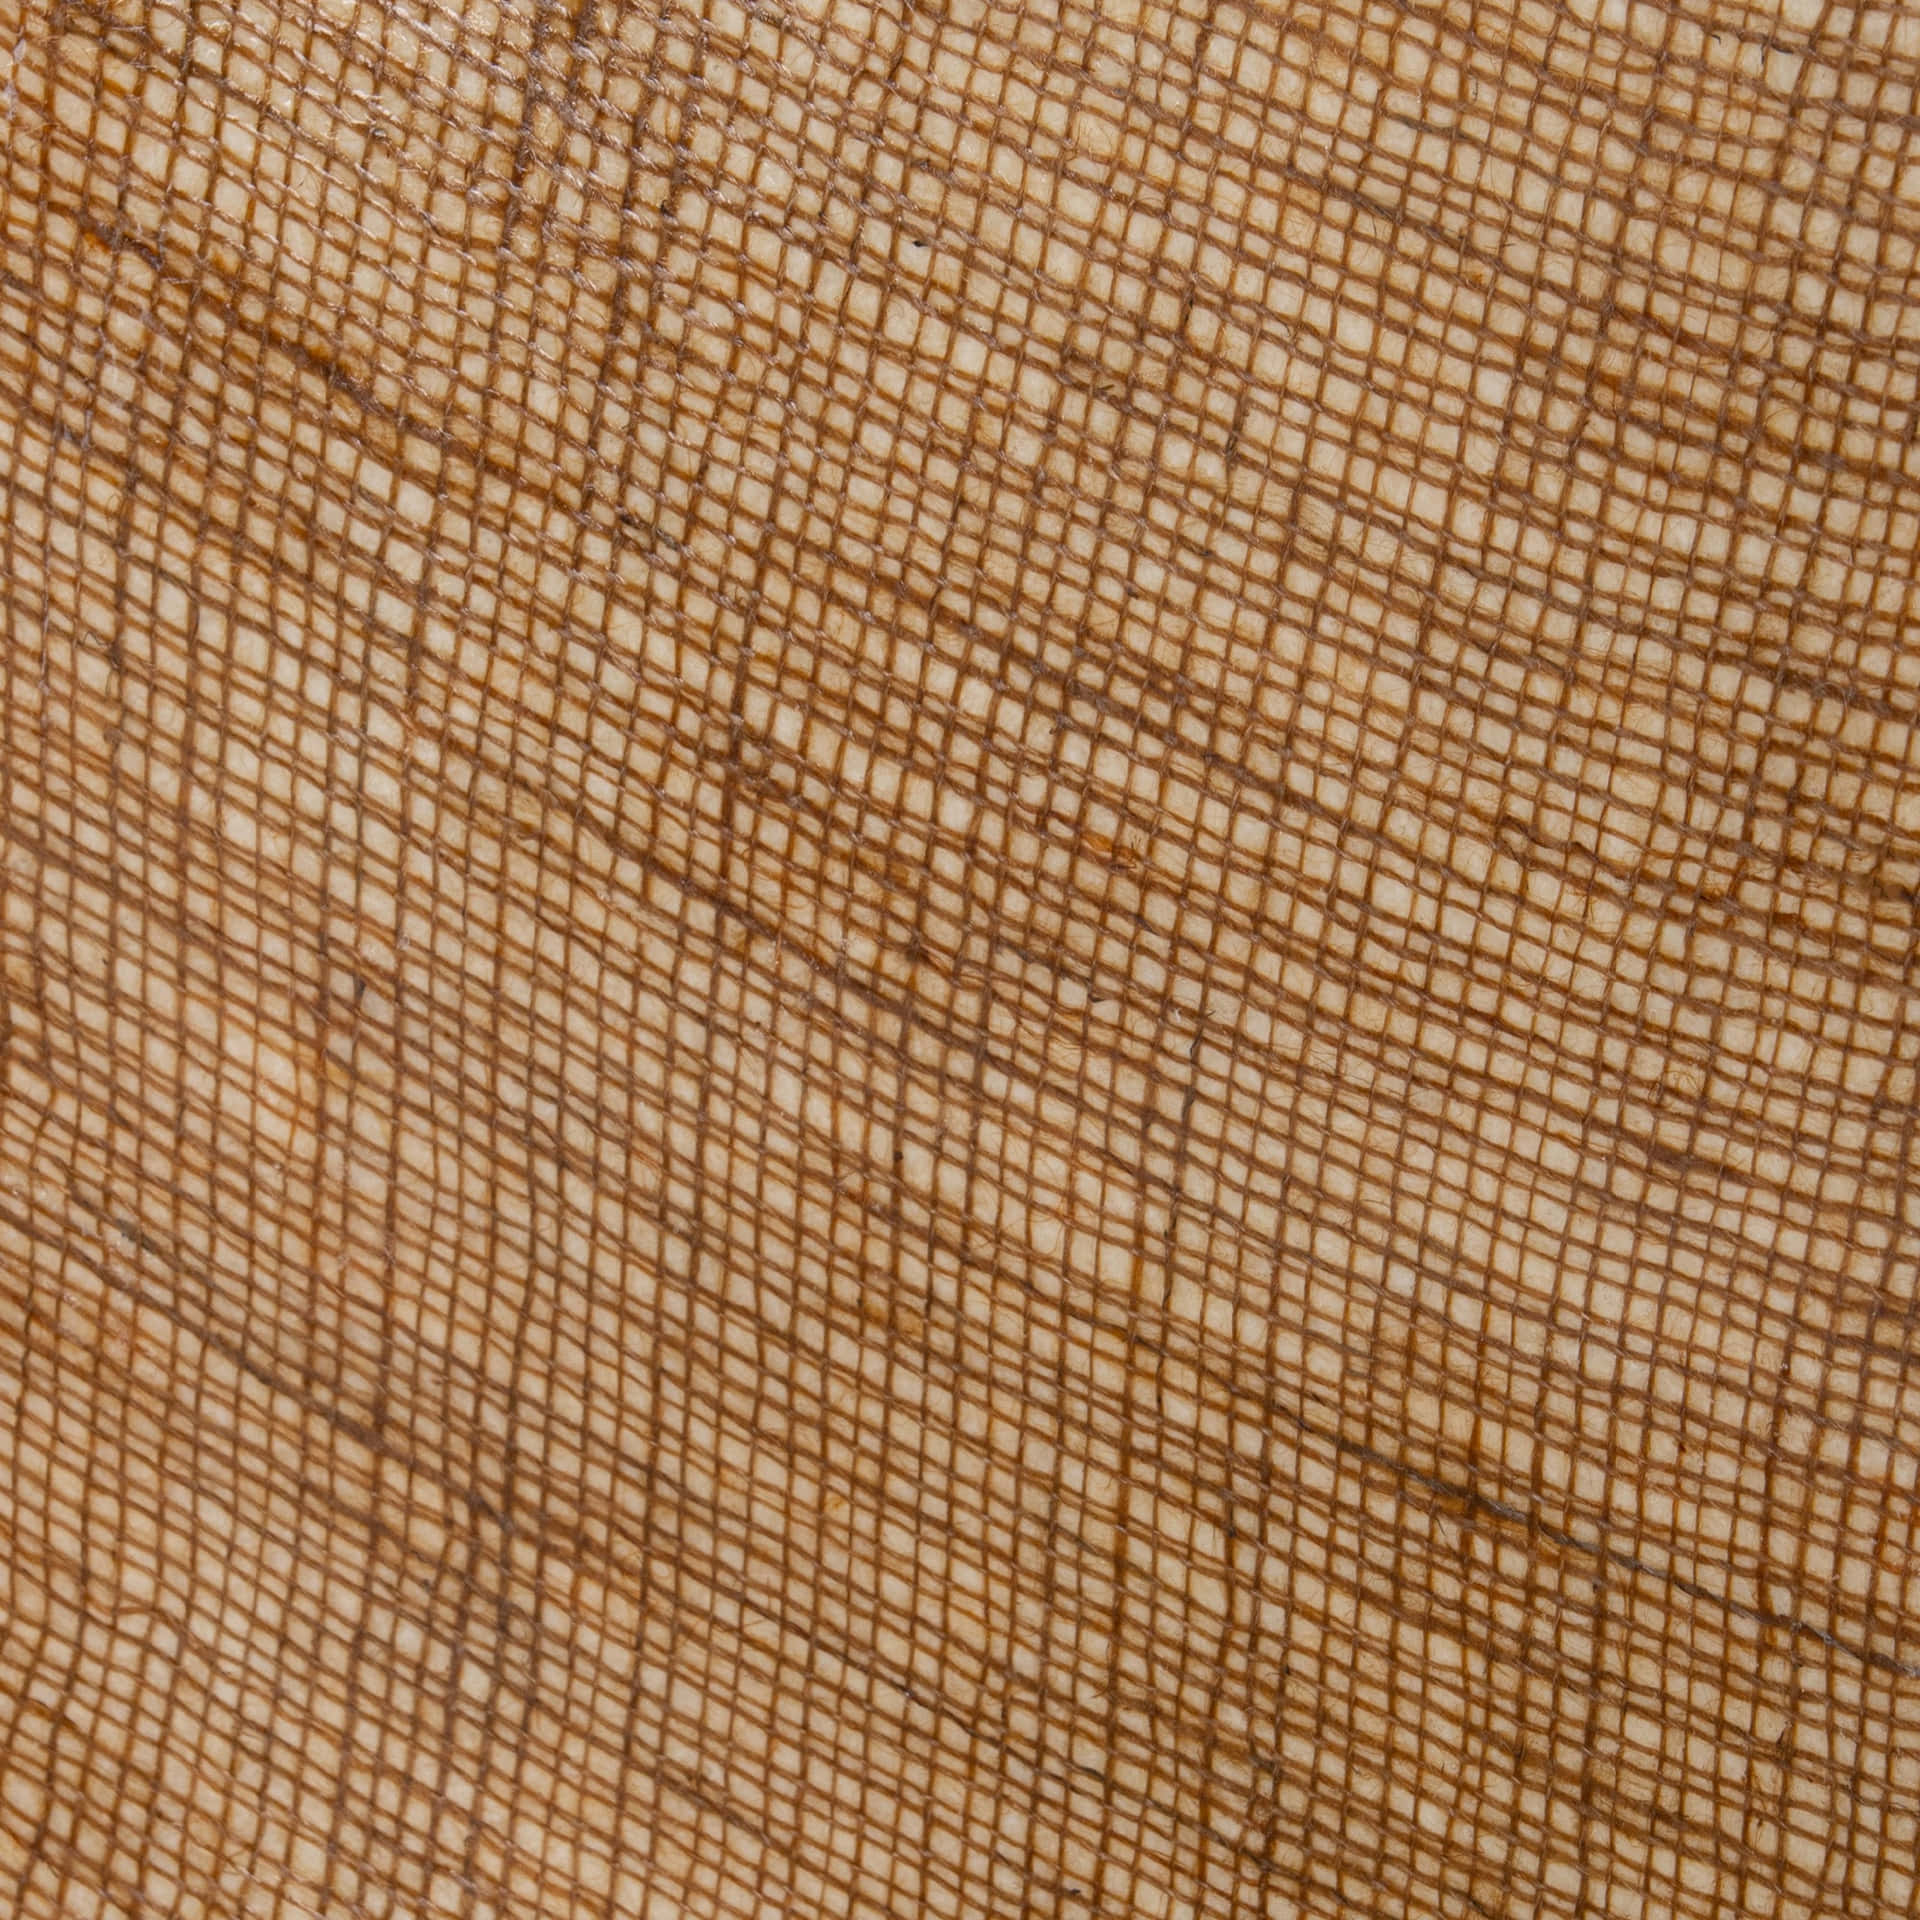 Burlap Background - The perfect rustic textile for your creative vision